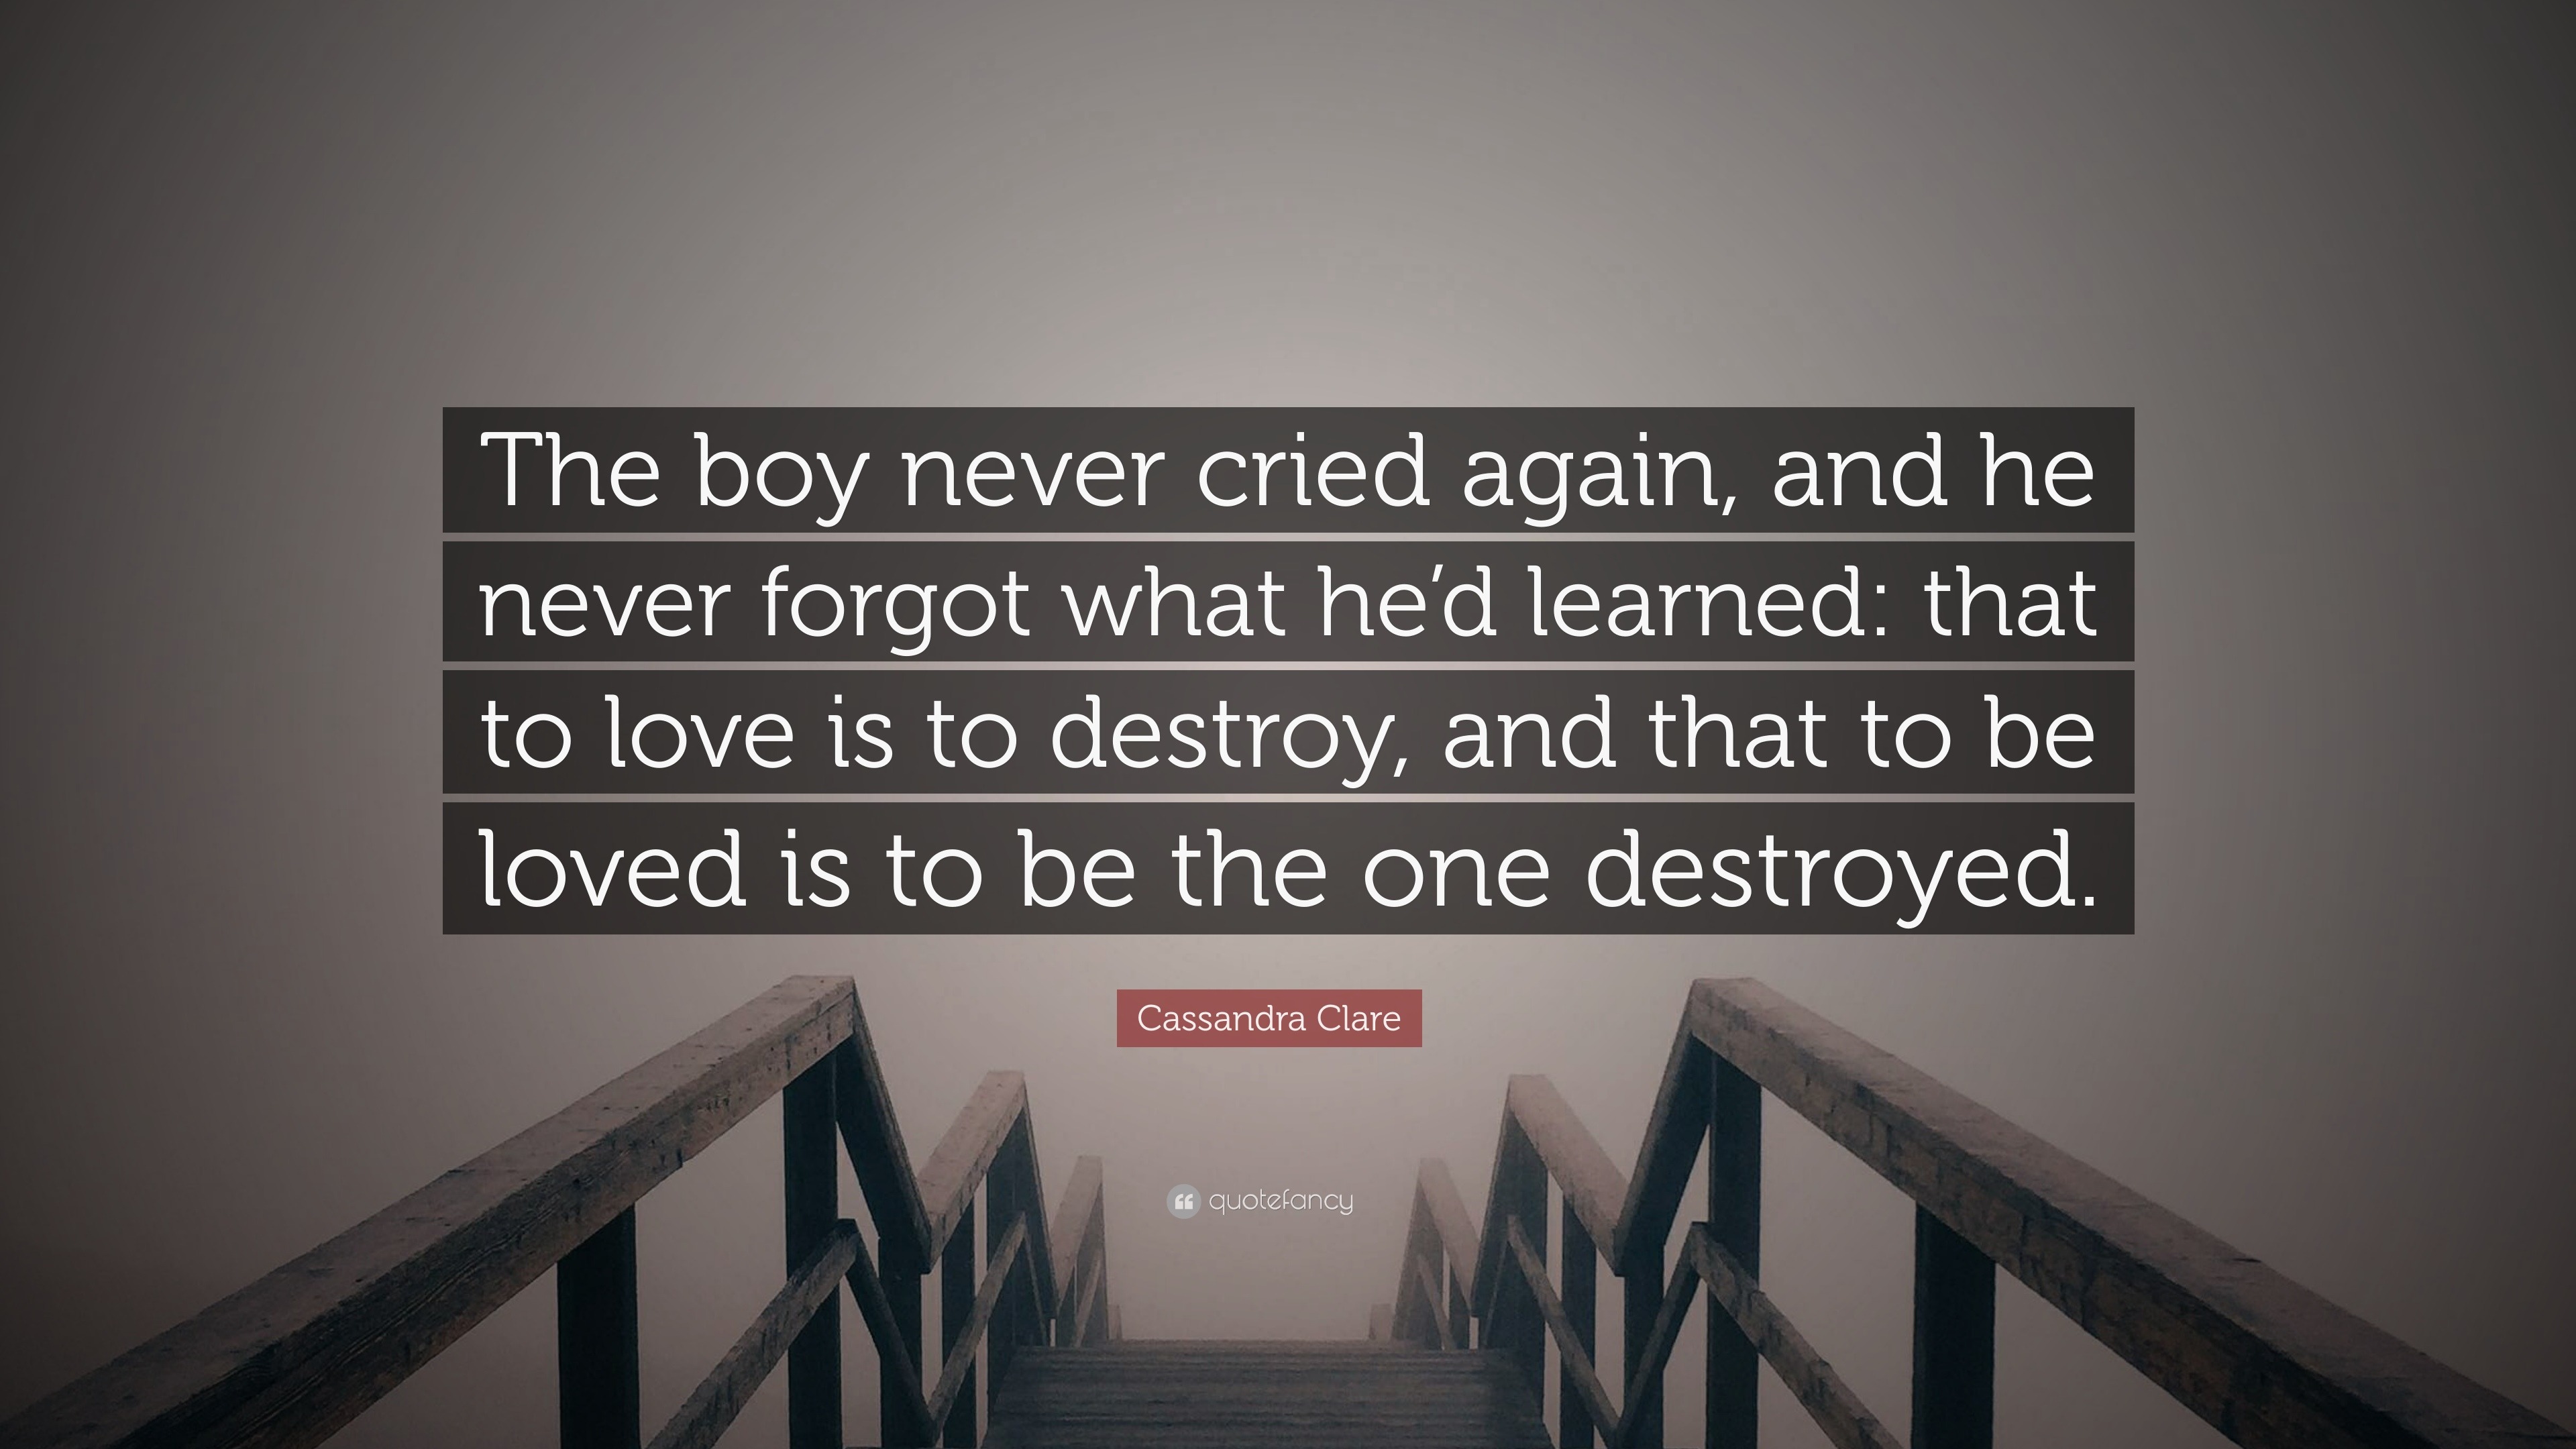 Cassandra Clare Quote “The boy never cried again and he never forgot what